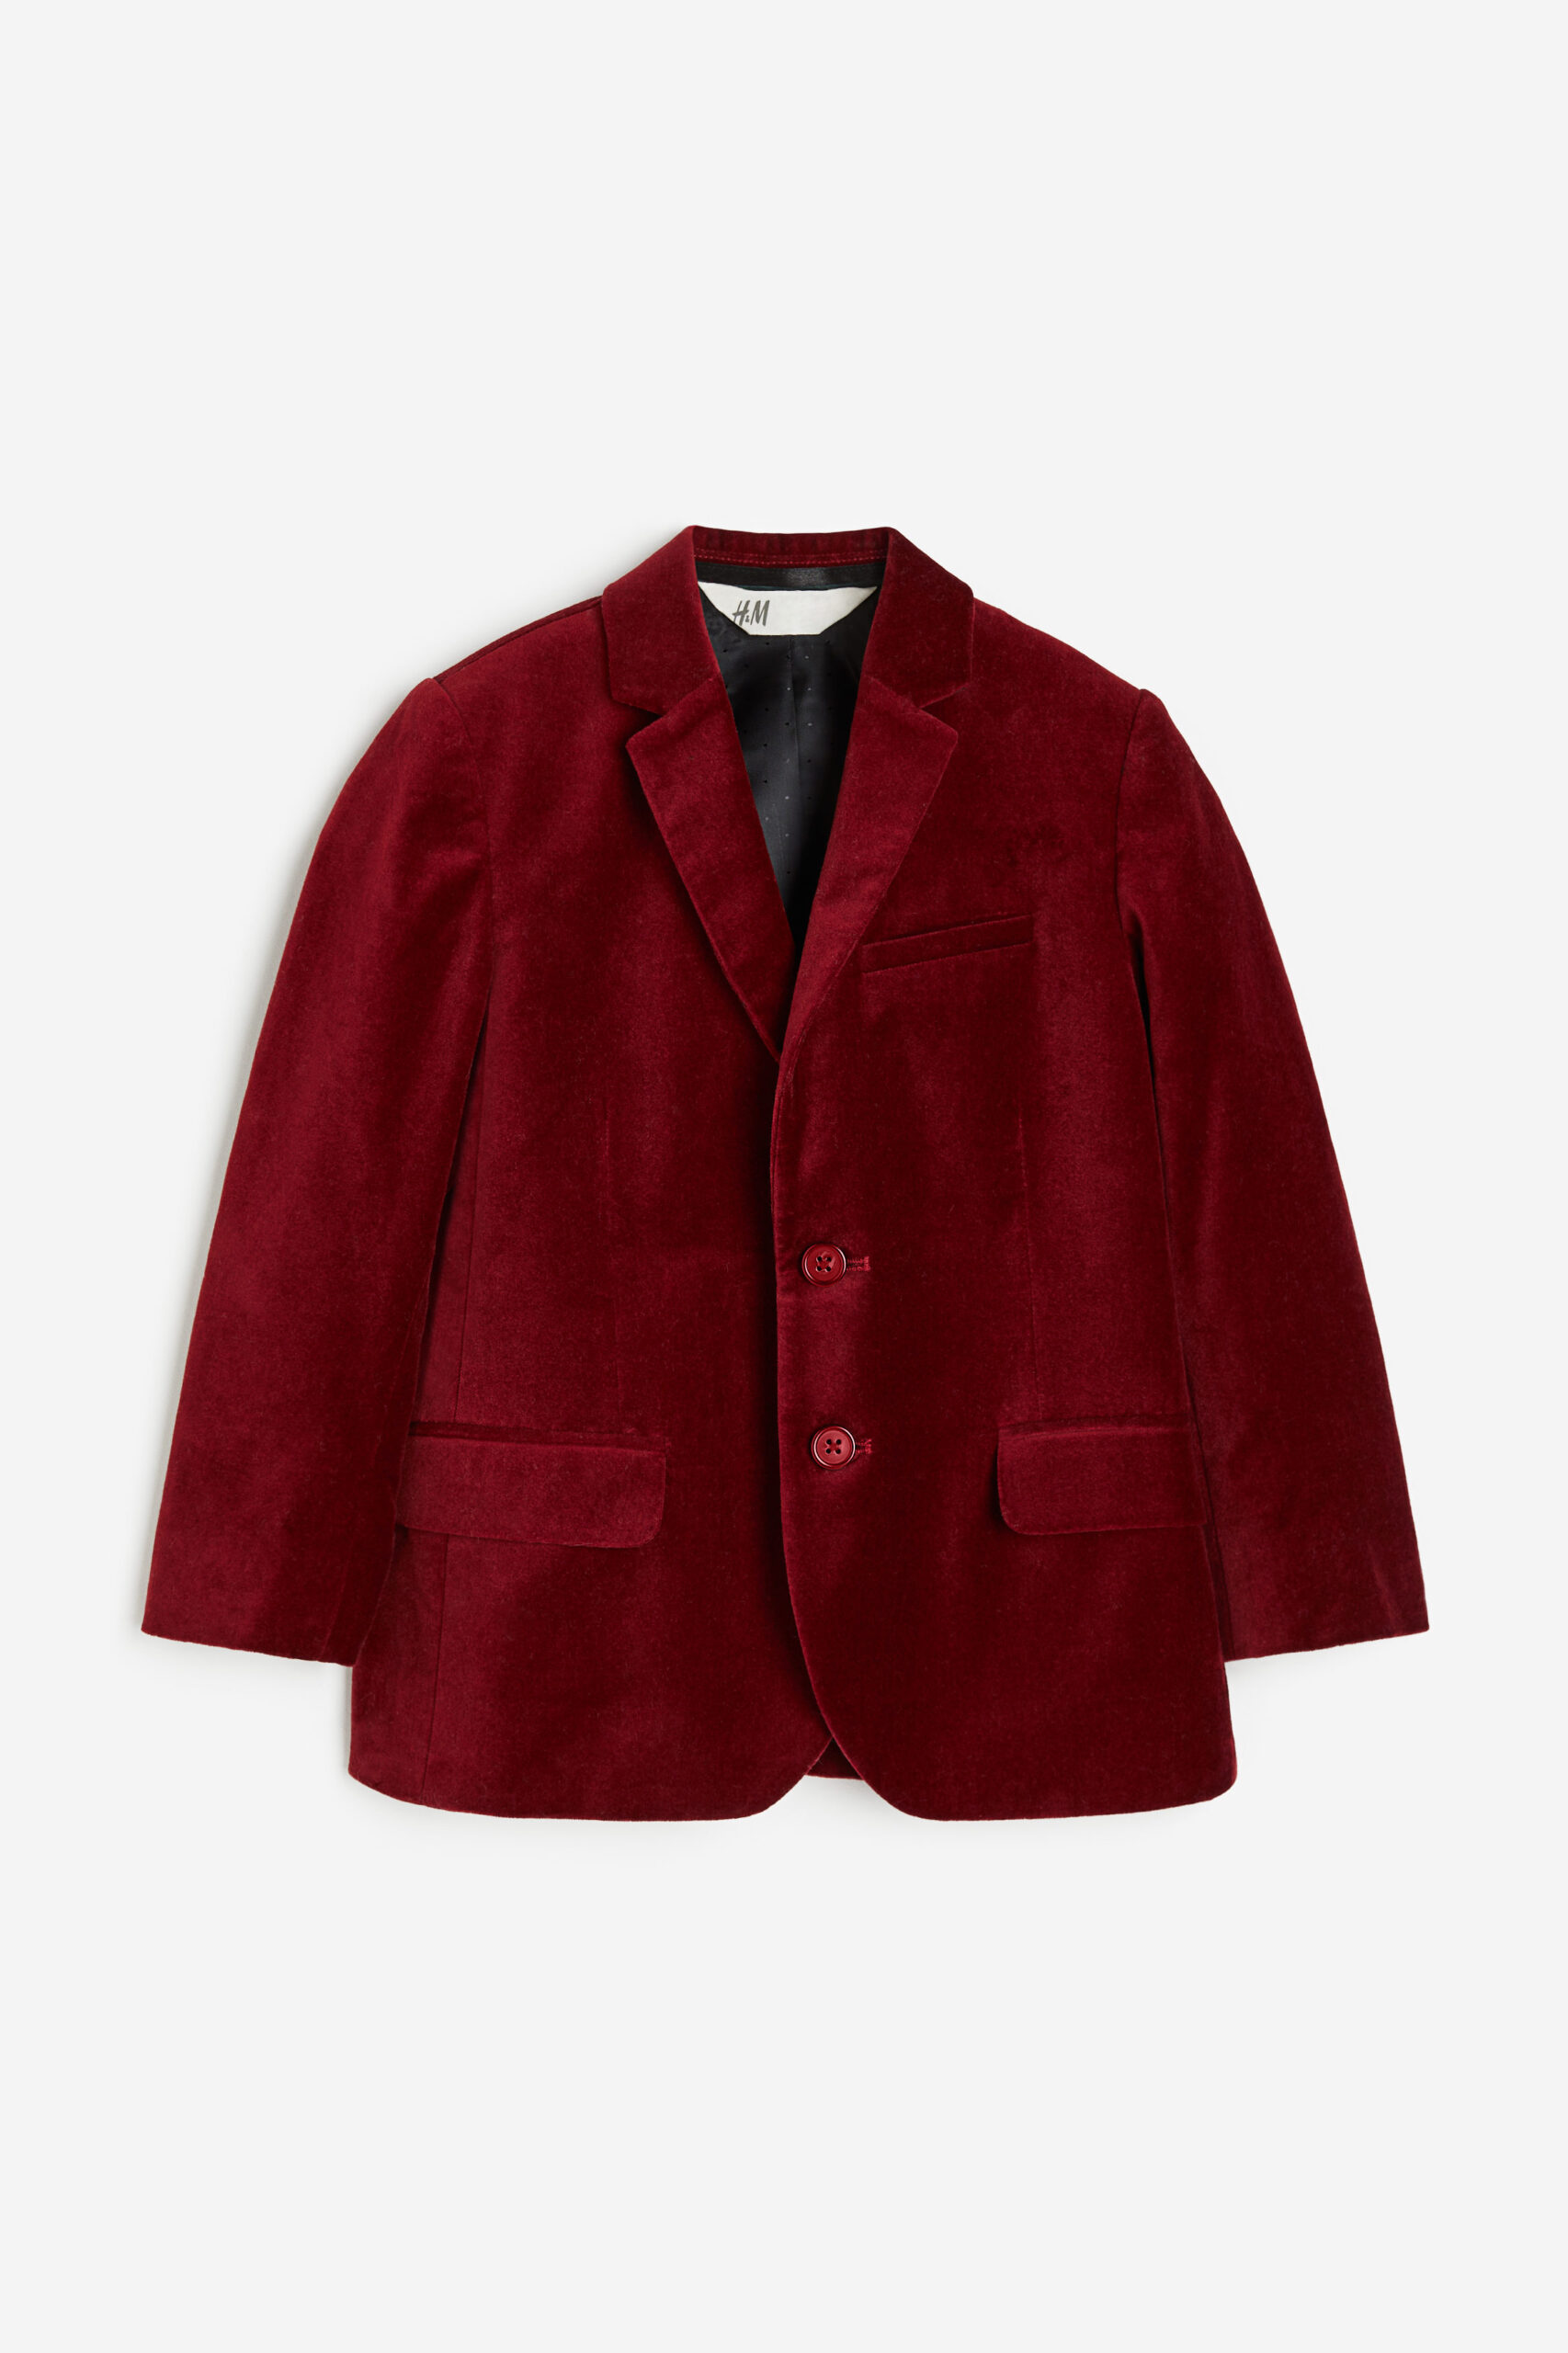 Velour red suit jacket